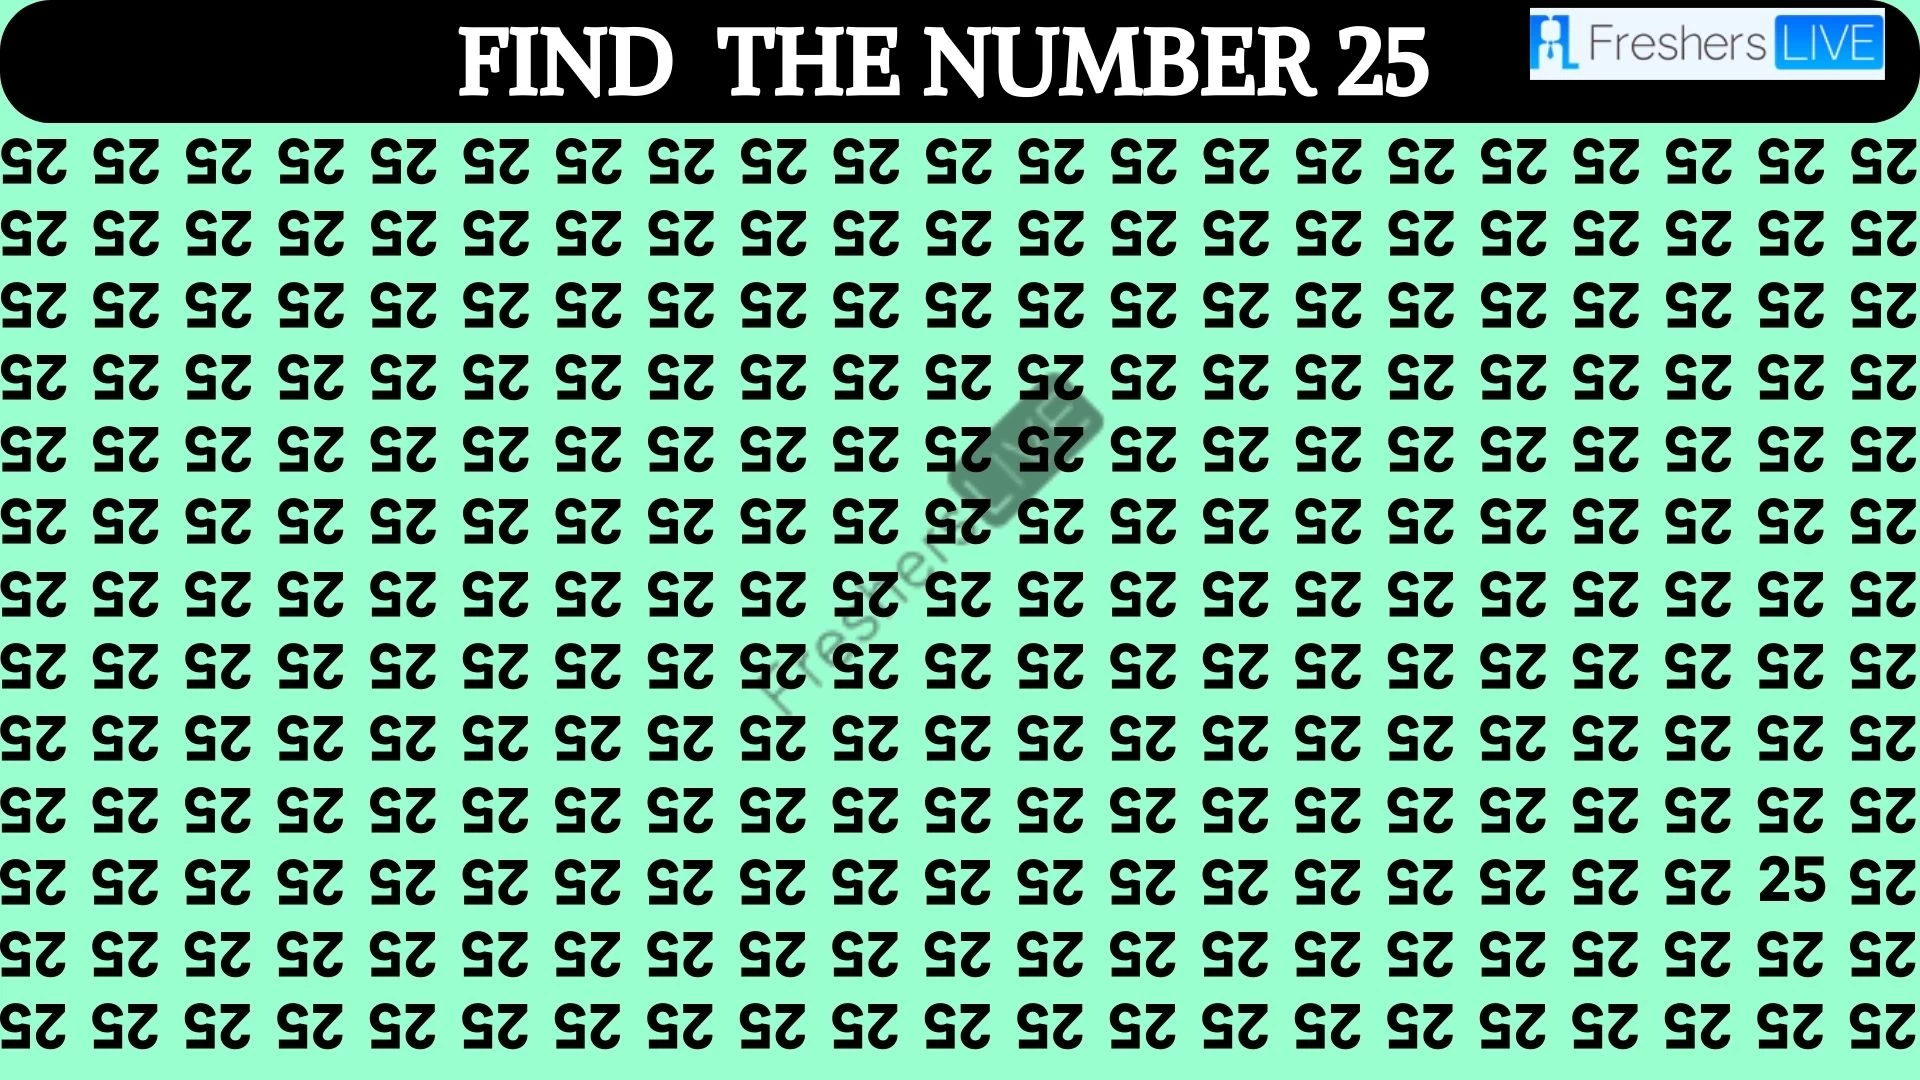 Only 50/50 HD Vision People can Find the Number 25 in 12 Secs